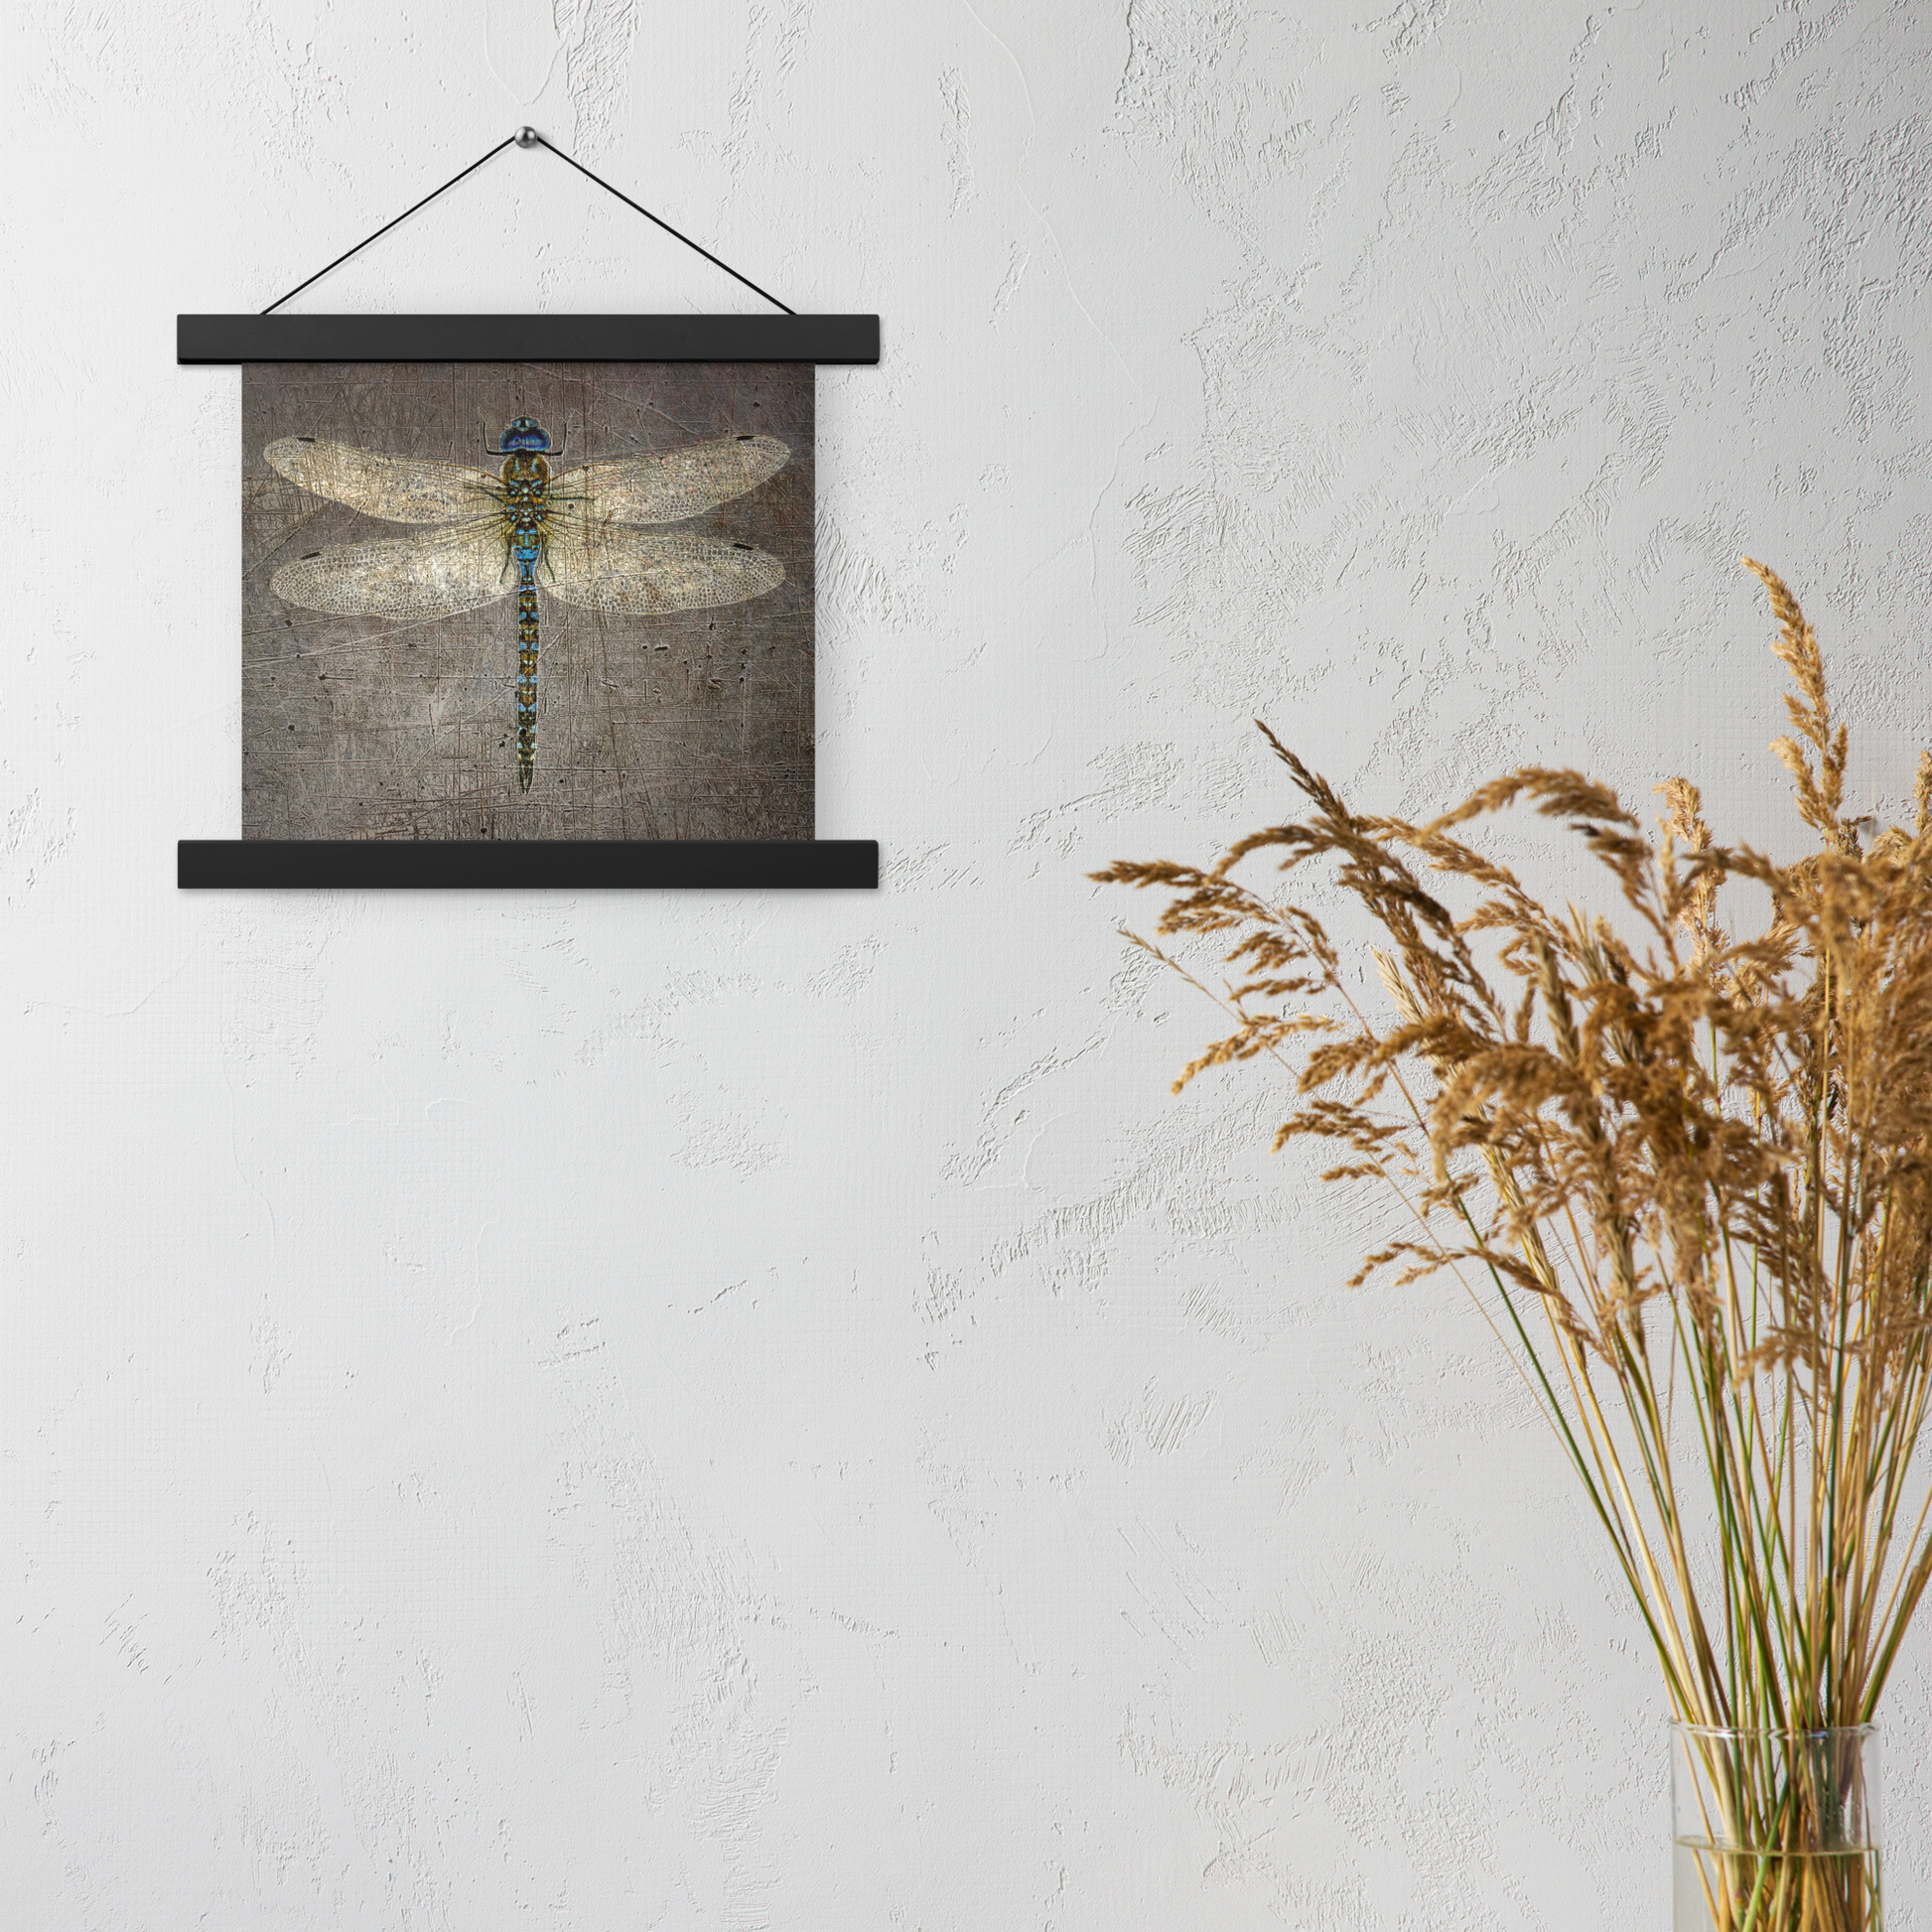 Dragonfly Themed Wall Hanging Dragonfly on Distressed Stone Background Print on Archival Paper with Magnetic Wood Hangers 14x14 hung